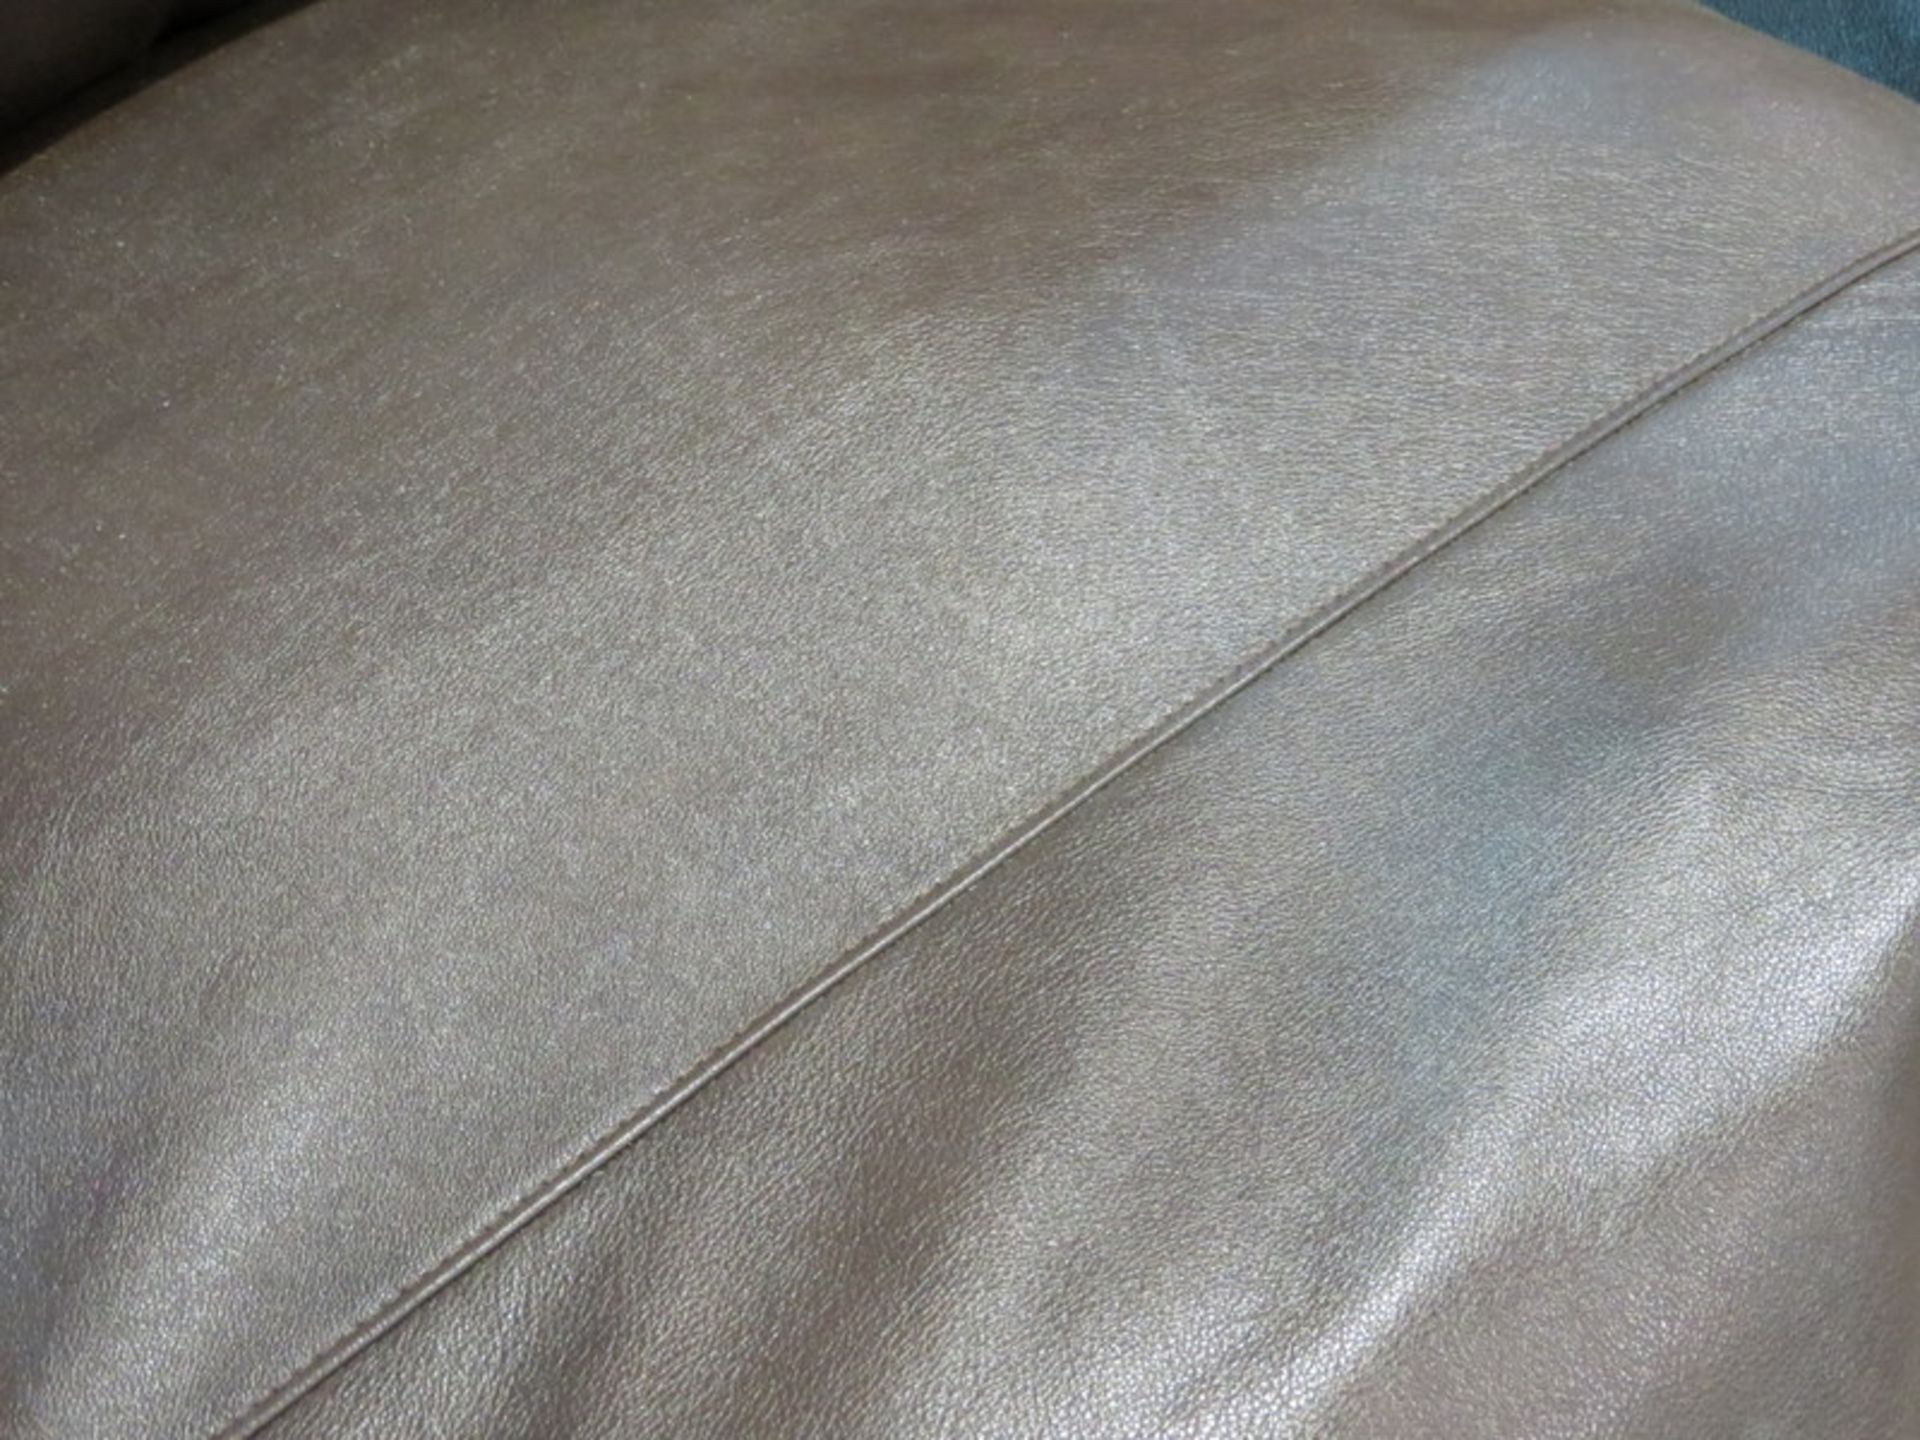 3 Seater Miracle brown 100% leather sofa. New in factory wrapping - 2200 x 970mm (LxD) - Image 4 of 4